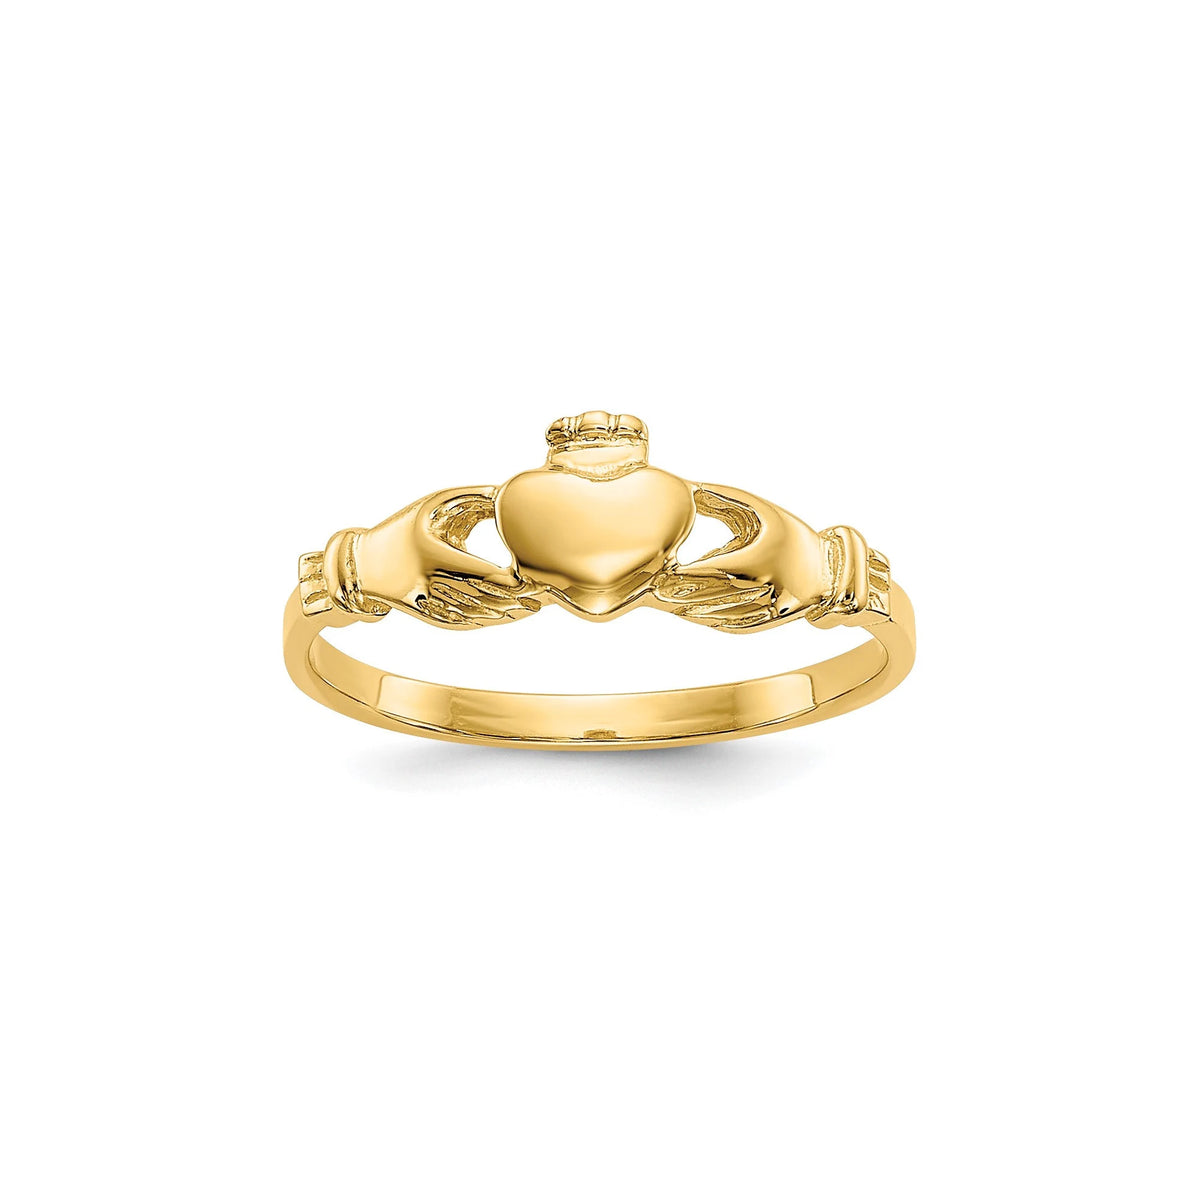 Genuine 14k Claddagh Baby Ring Size 1 Infant Baby Band with Heart - Made in USA - Gift Box Included - Size 1